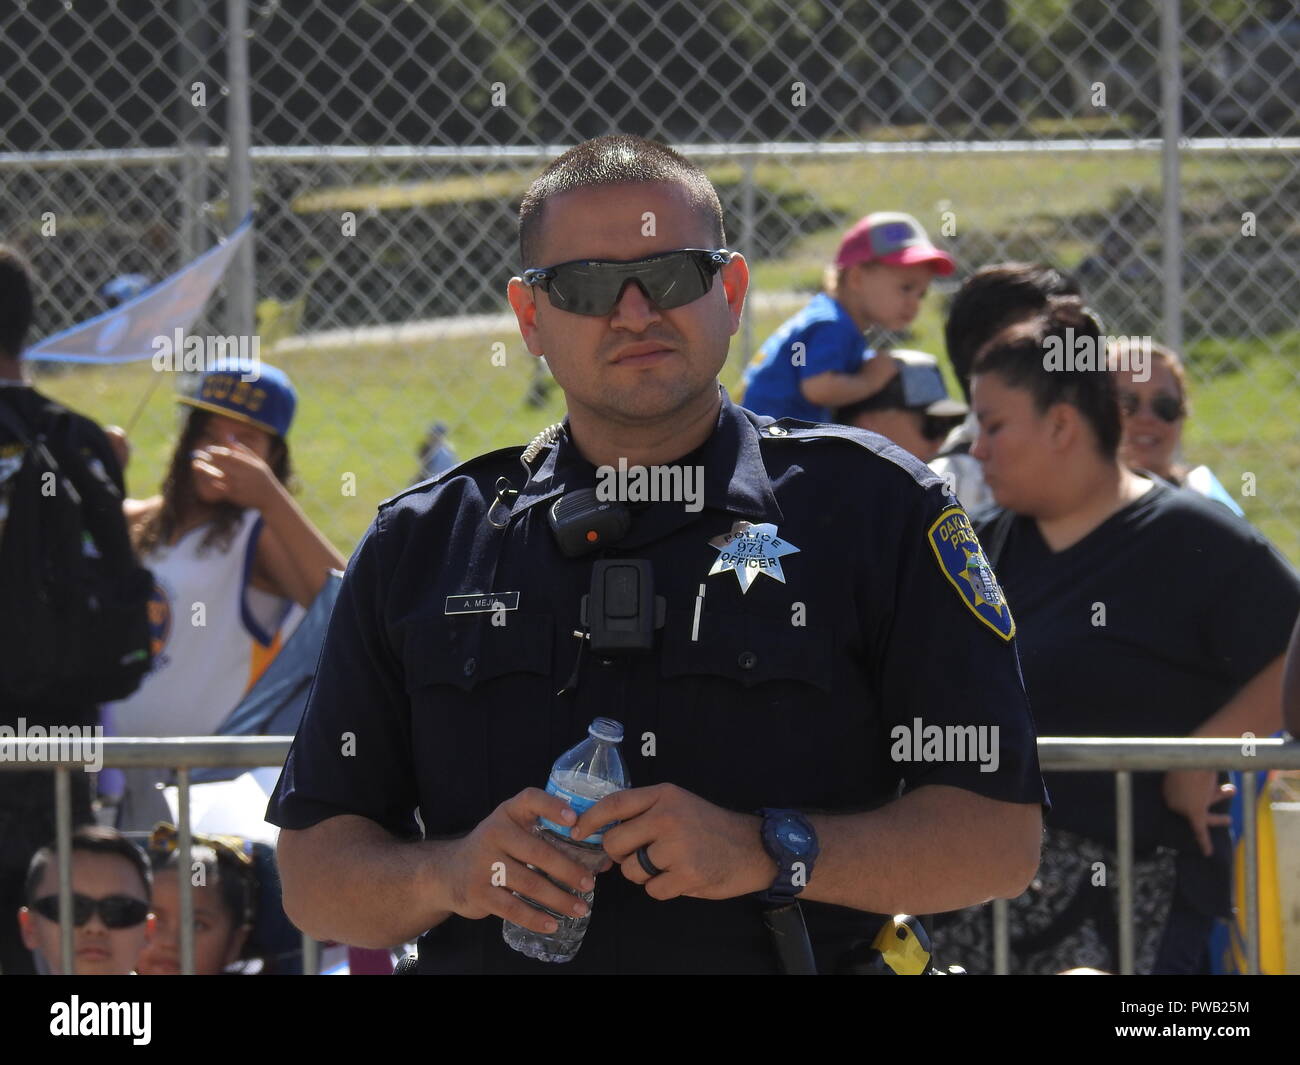 Oakland police Officer Alexis Mejia provides security at the Golden State Warriors victory parade in Oakland on June 15, 2017. Stock Photo